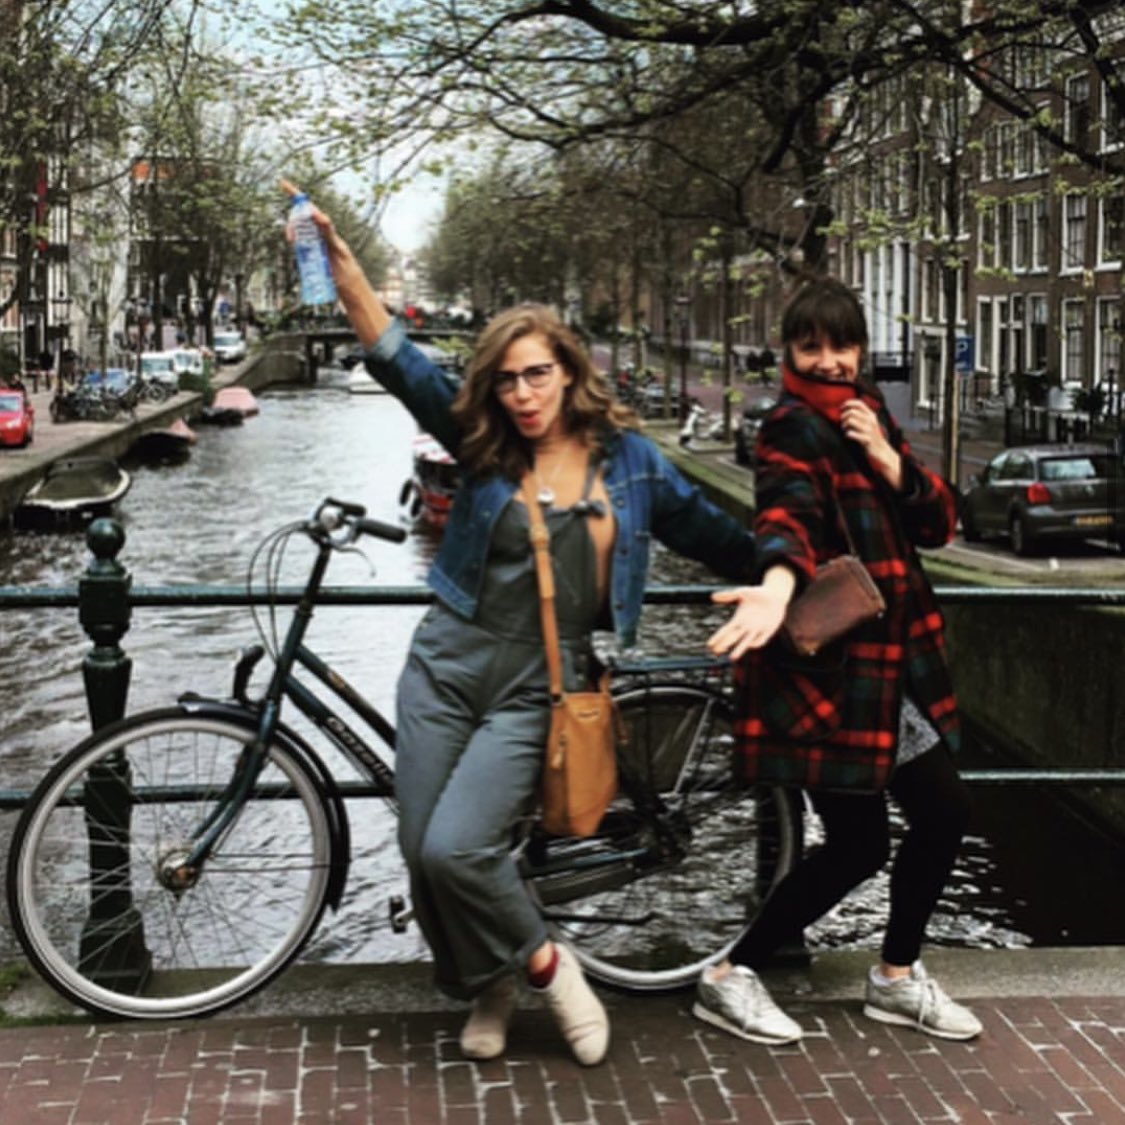 Our European Tour is ON SALE NOW! To celebrate, here are some fond moments from our Europe tours of past. We are so excited to be heading back your way again! 🎟️ lakestreetdive.com